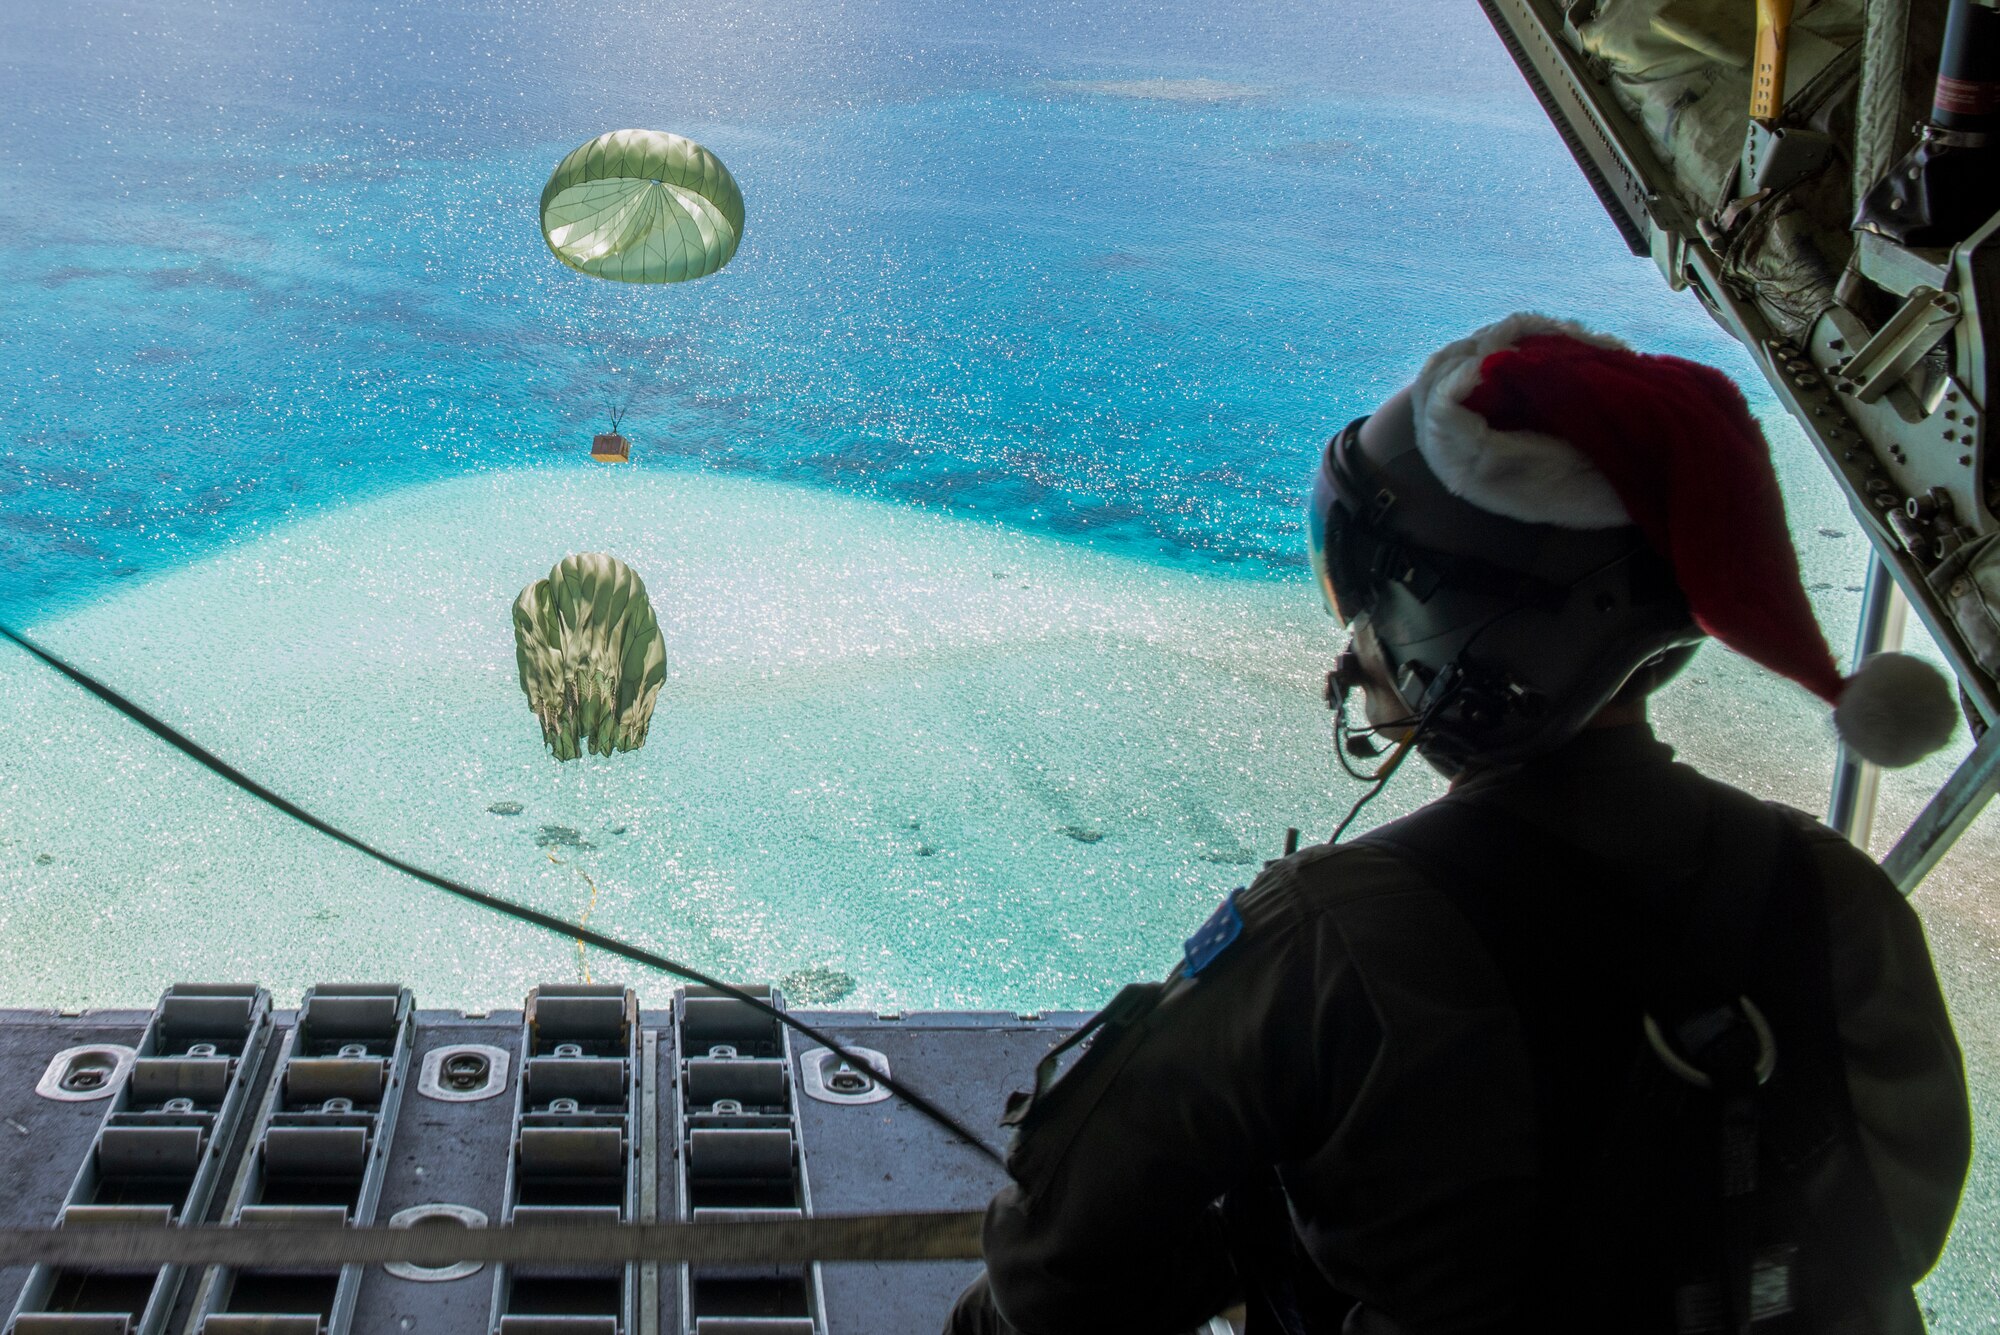 Royal Australian Air Force SGT Karl Penny, 37th Squadron C-130J Super Hercules loadmaster out of RAAF Base Richmond, Australia, looks out as the parachute for a Low-Cost, Low-Altitude bundle carries humanitarian aid down to the atoll of Kapingamarangi, Federated States of Micronesia (FSM), during Operation Christmas Drop 2018, Dec. 13, 2018. Every December U.S. Air Force crews from Yokota Air Base, Japan team up with the Japan Air Self-Defense Force (Koku Jietai) and RAAF to airdrop supplies to the Commonwealth of the Northern Marianas, FSM, and the Republic of Palau. (U.S. Air Force photo by Senior Airman Matthew Gilmore)